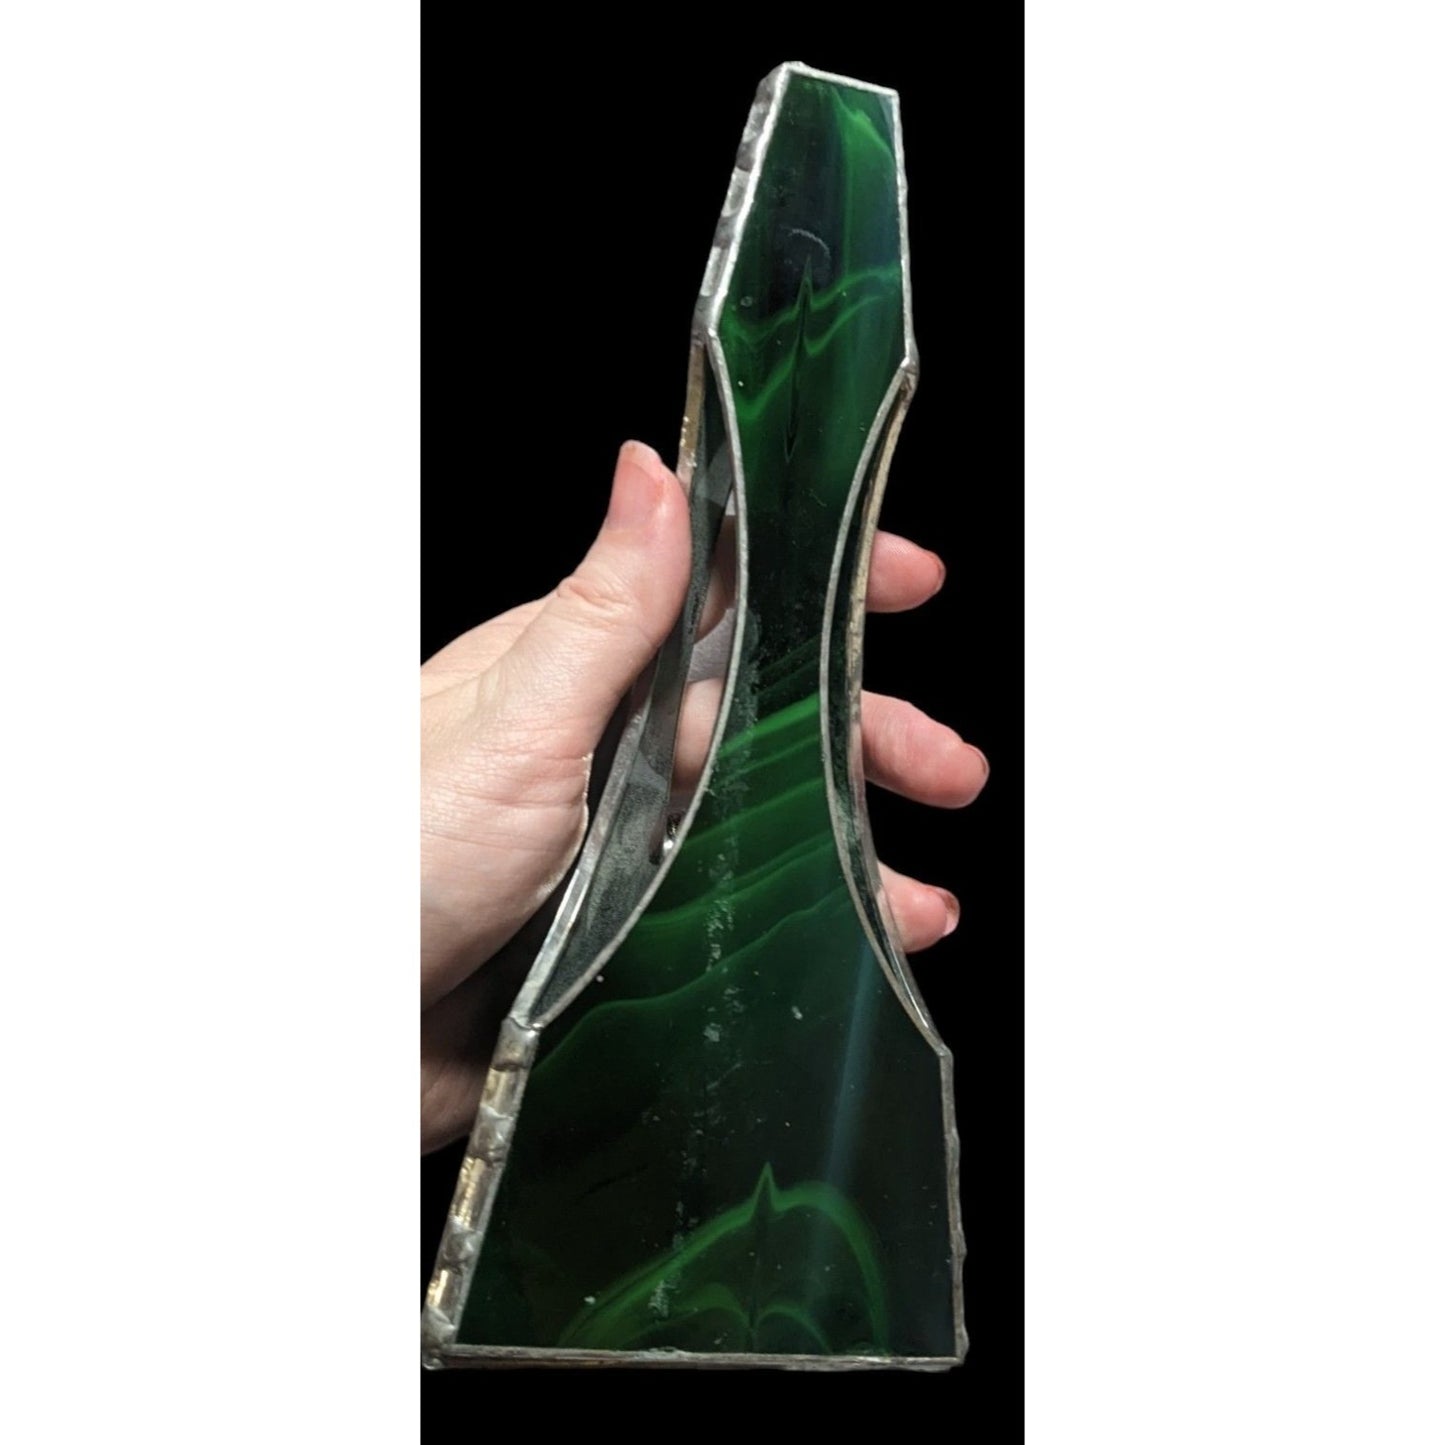 Green Marbled Stained Glass Decor